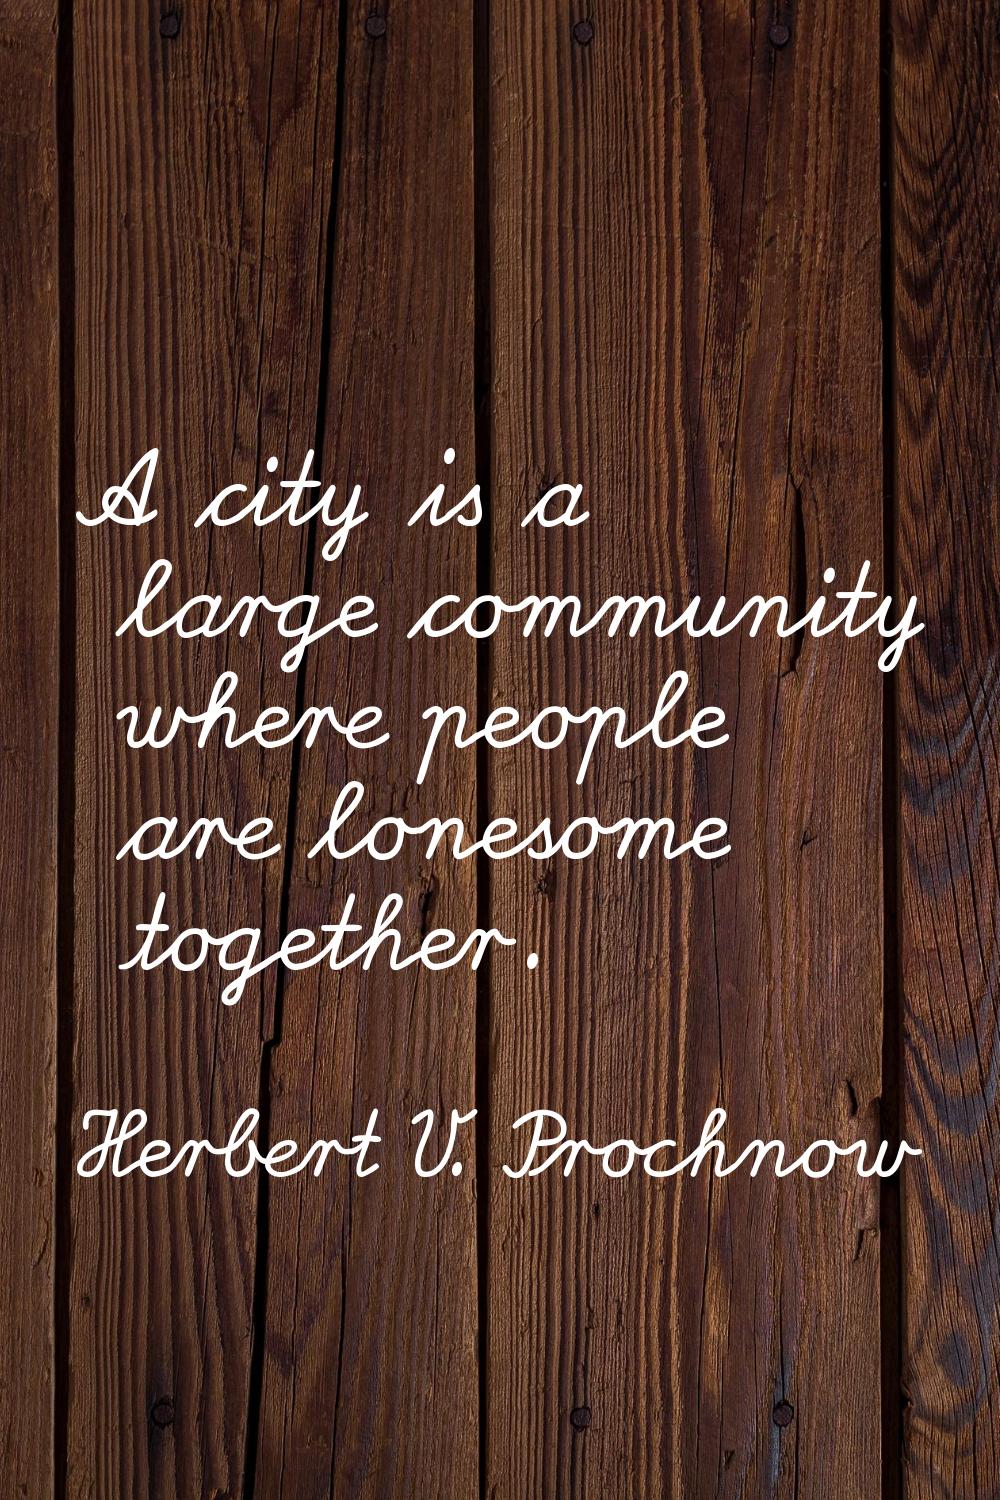 A city is a large community where people are lonesome together.